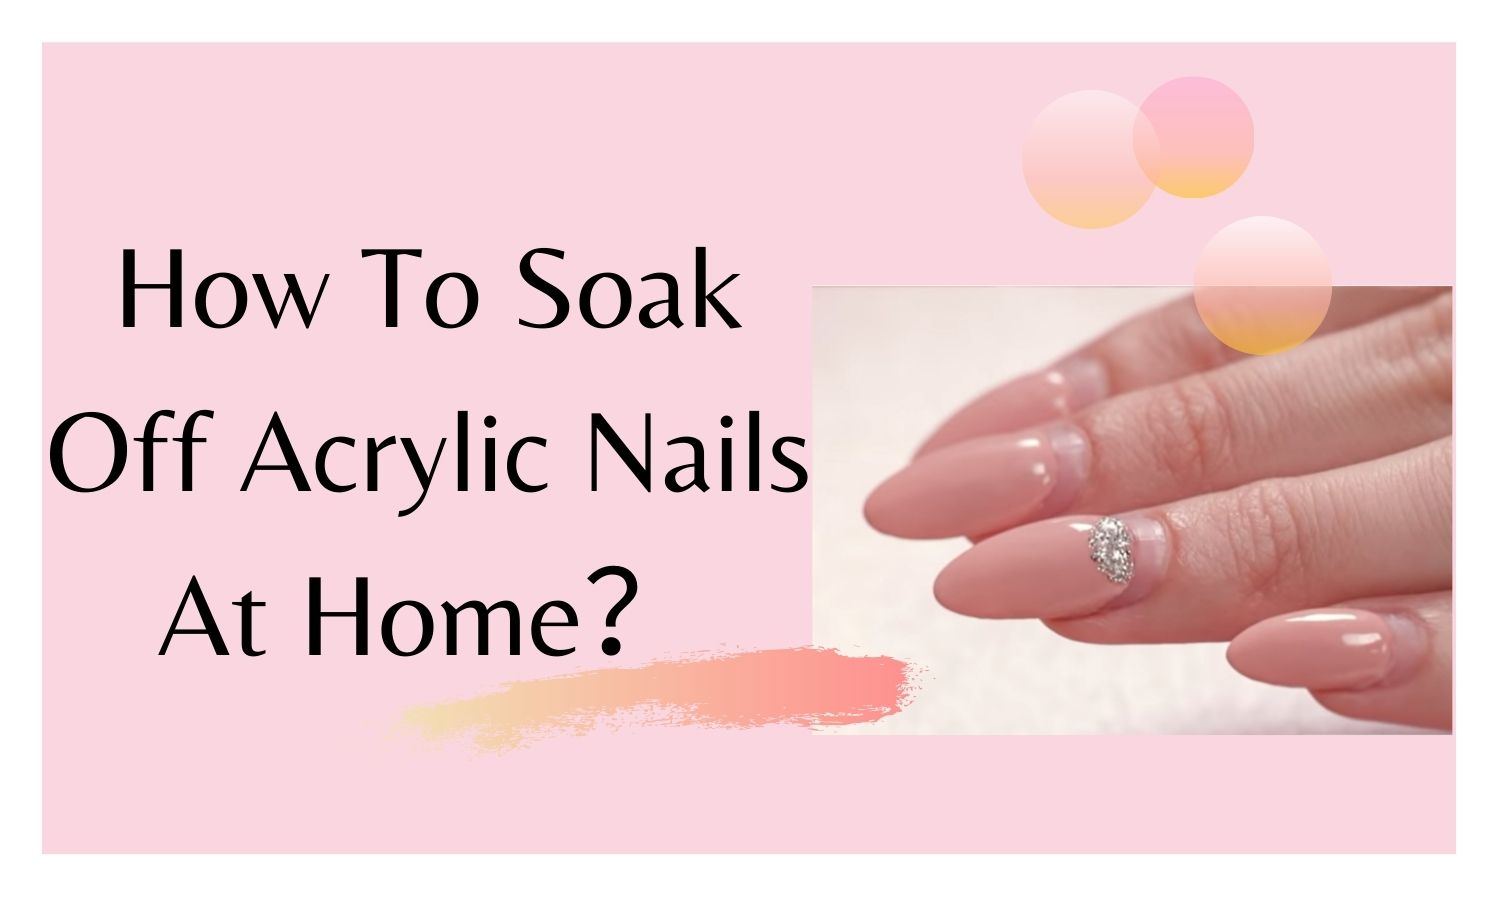 How To Soak Off Acrylic Nails At Home？